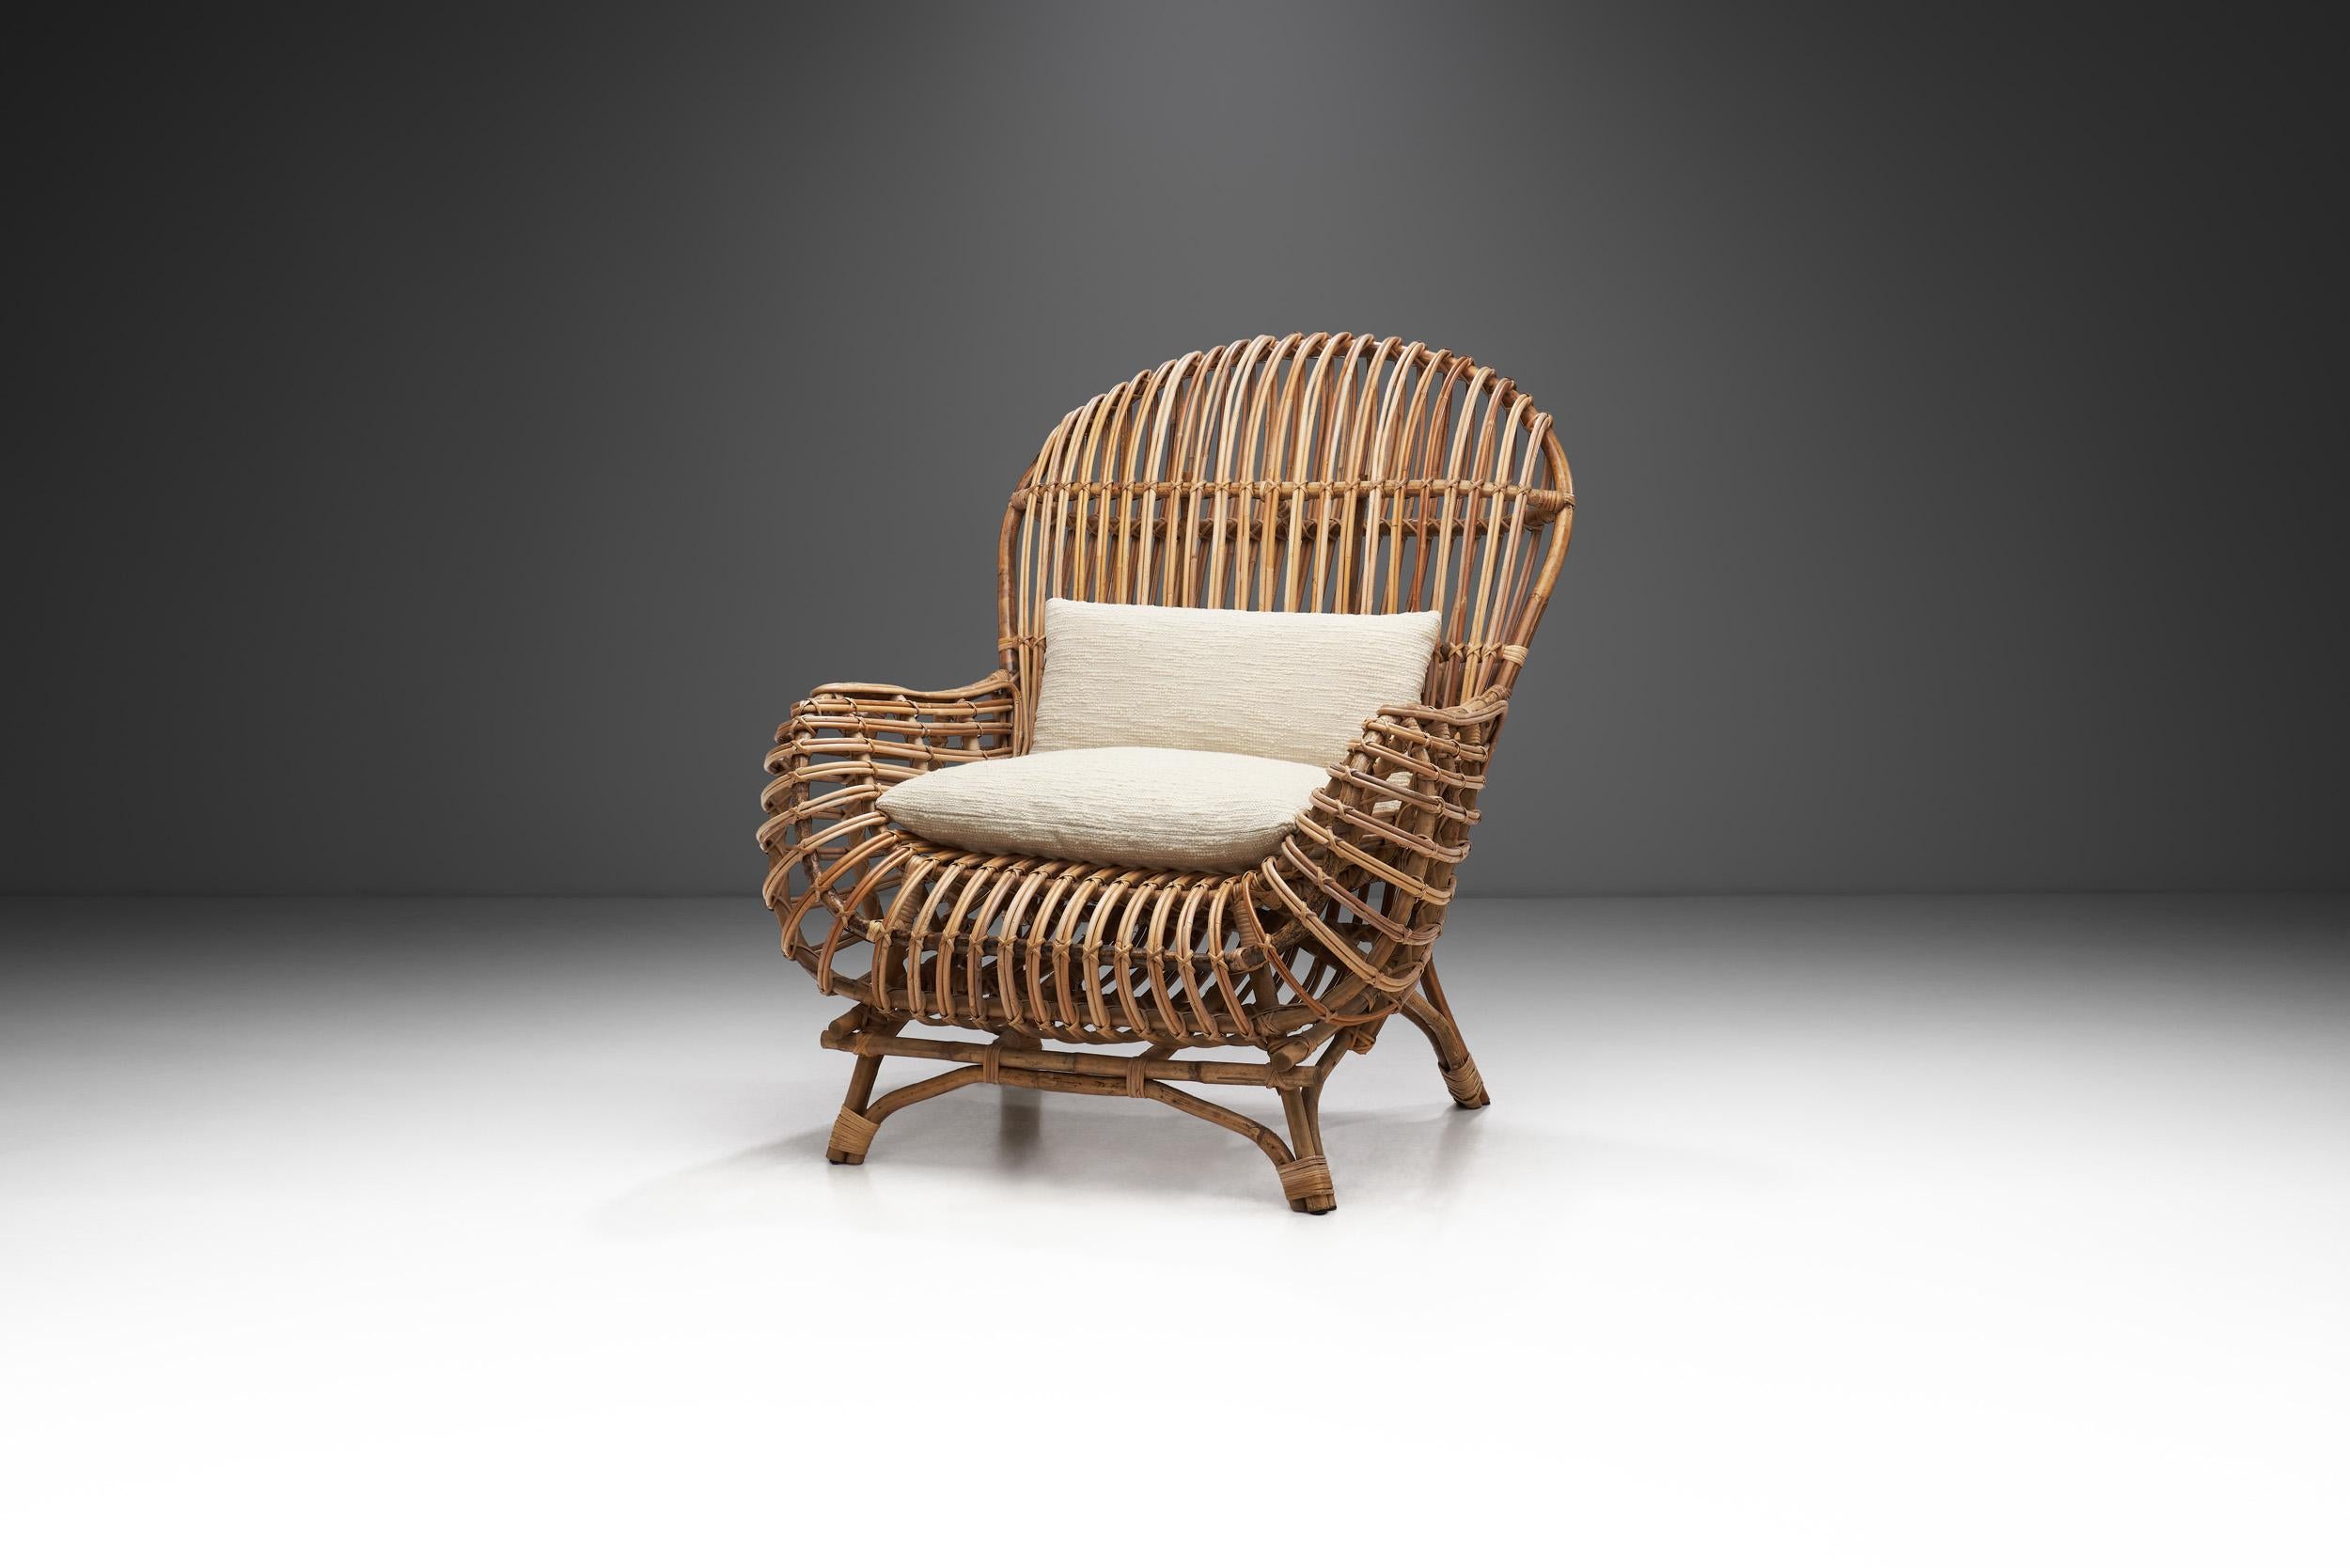 From every angle, this chair is visually arresting; from the front to the sides and back, the curves and geometric lines provide plenty of visual interest. This wicker armchair has a distinct designer edge, and the quality handwoven wicker makes it